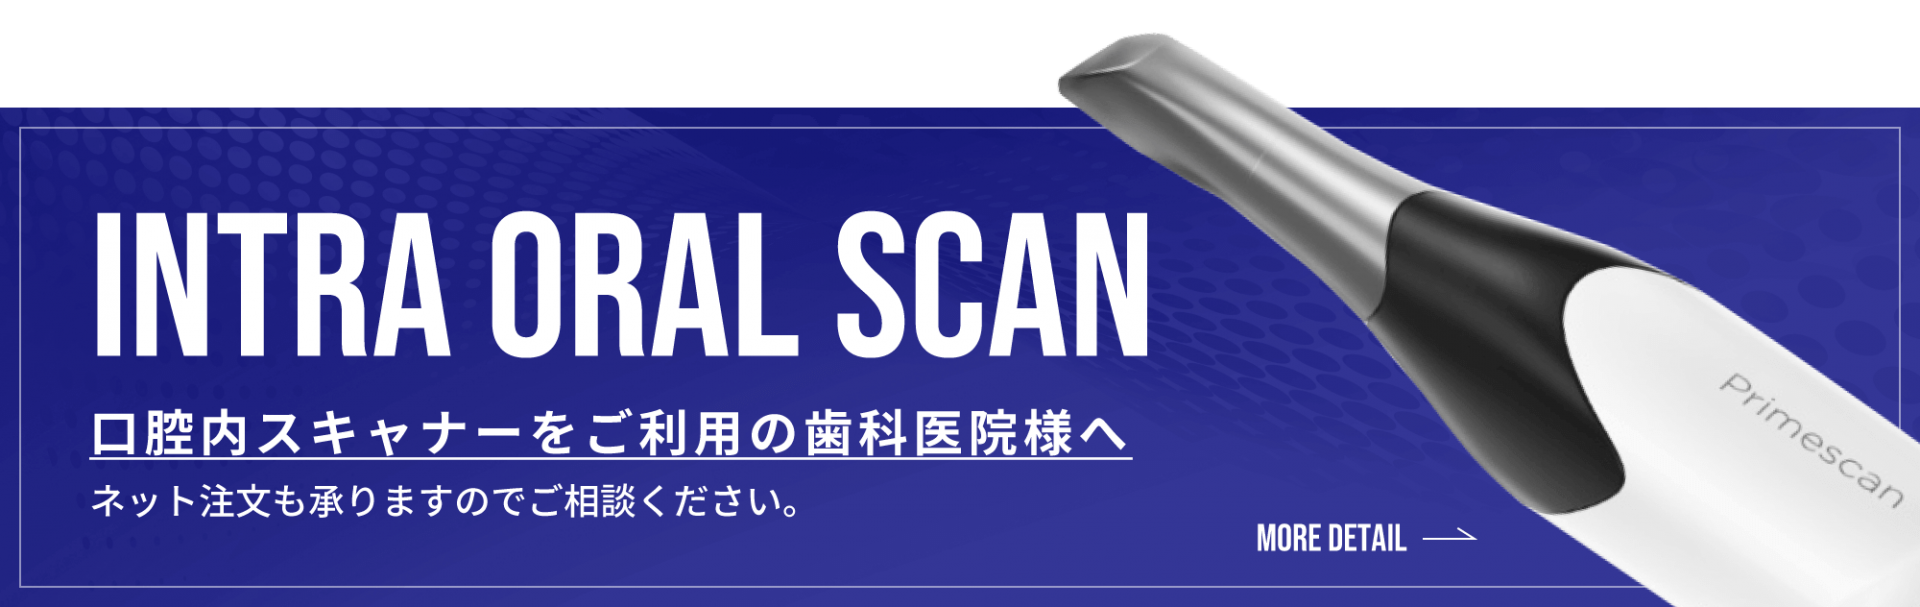 INTRA ORAL SCAN